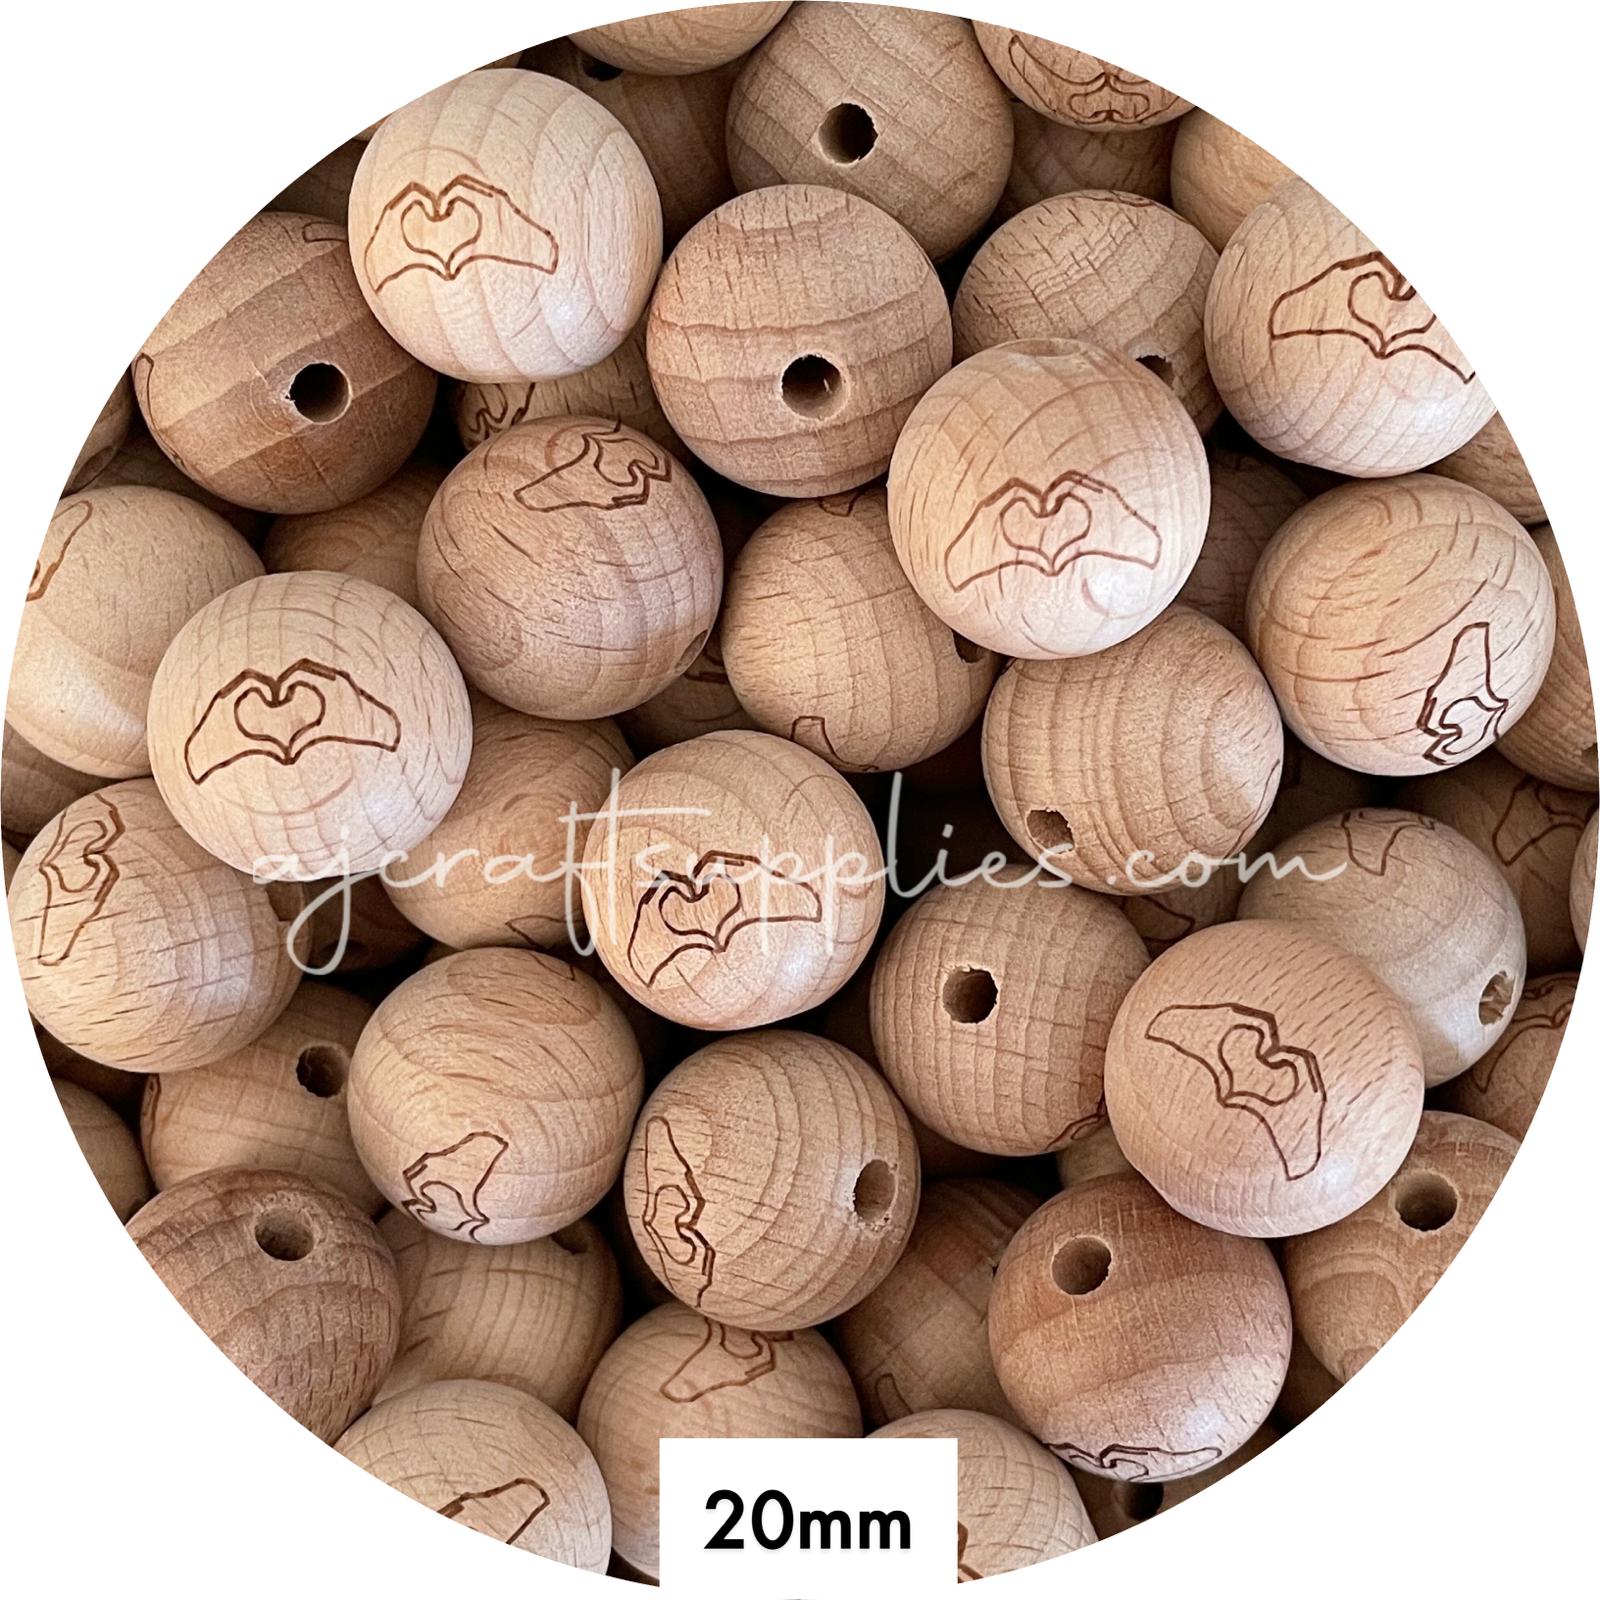 Beech Wood Engraved Beads (Heart Hands) - 20mm Round - 5 beads (Limited Edition)